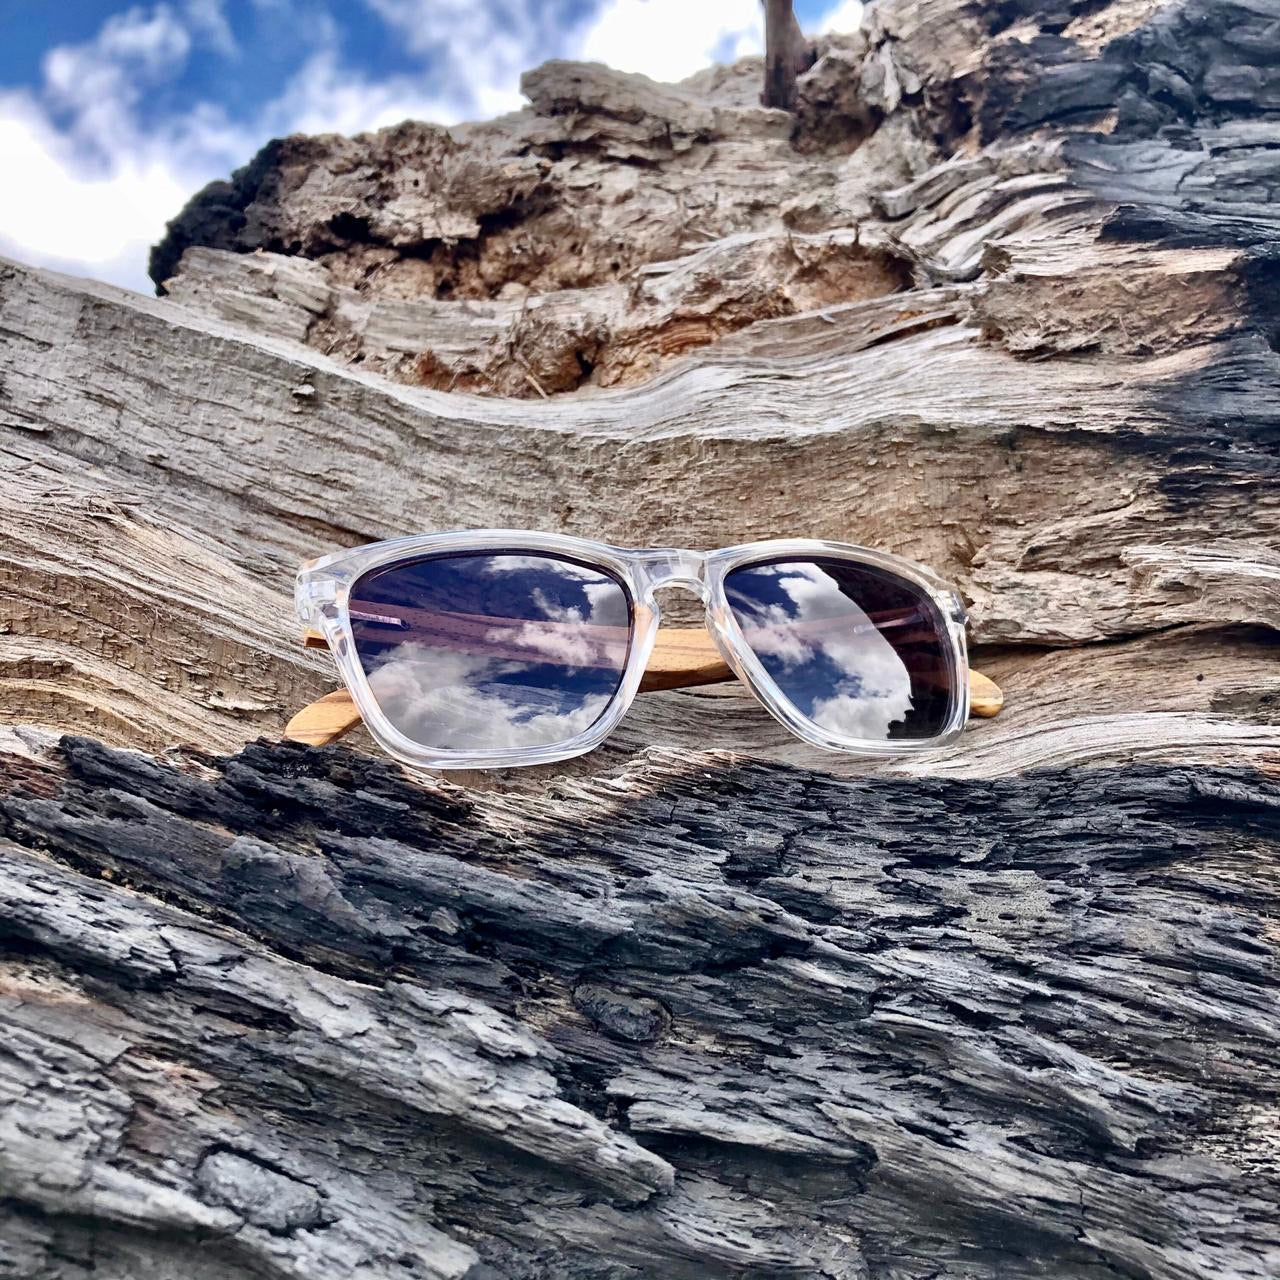 Ladies clear frame sunglasses with grey lens and zebra wood arms. Polarised and UV protection for our South African sunny skies. Hashtag Bamboo, local is lekka.